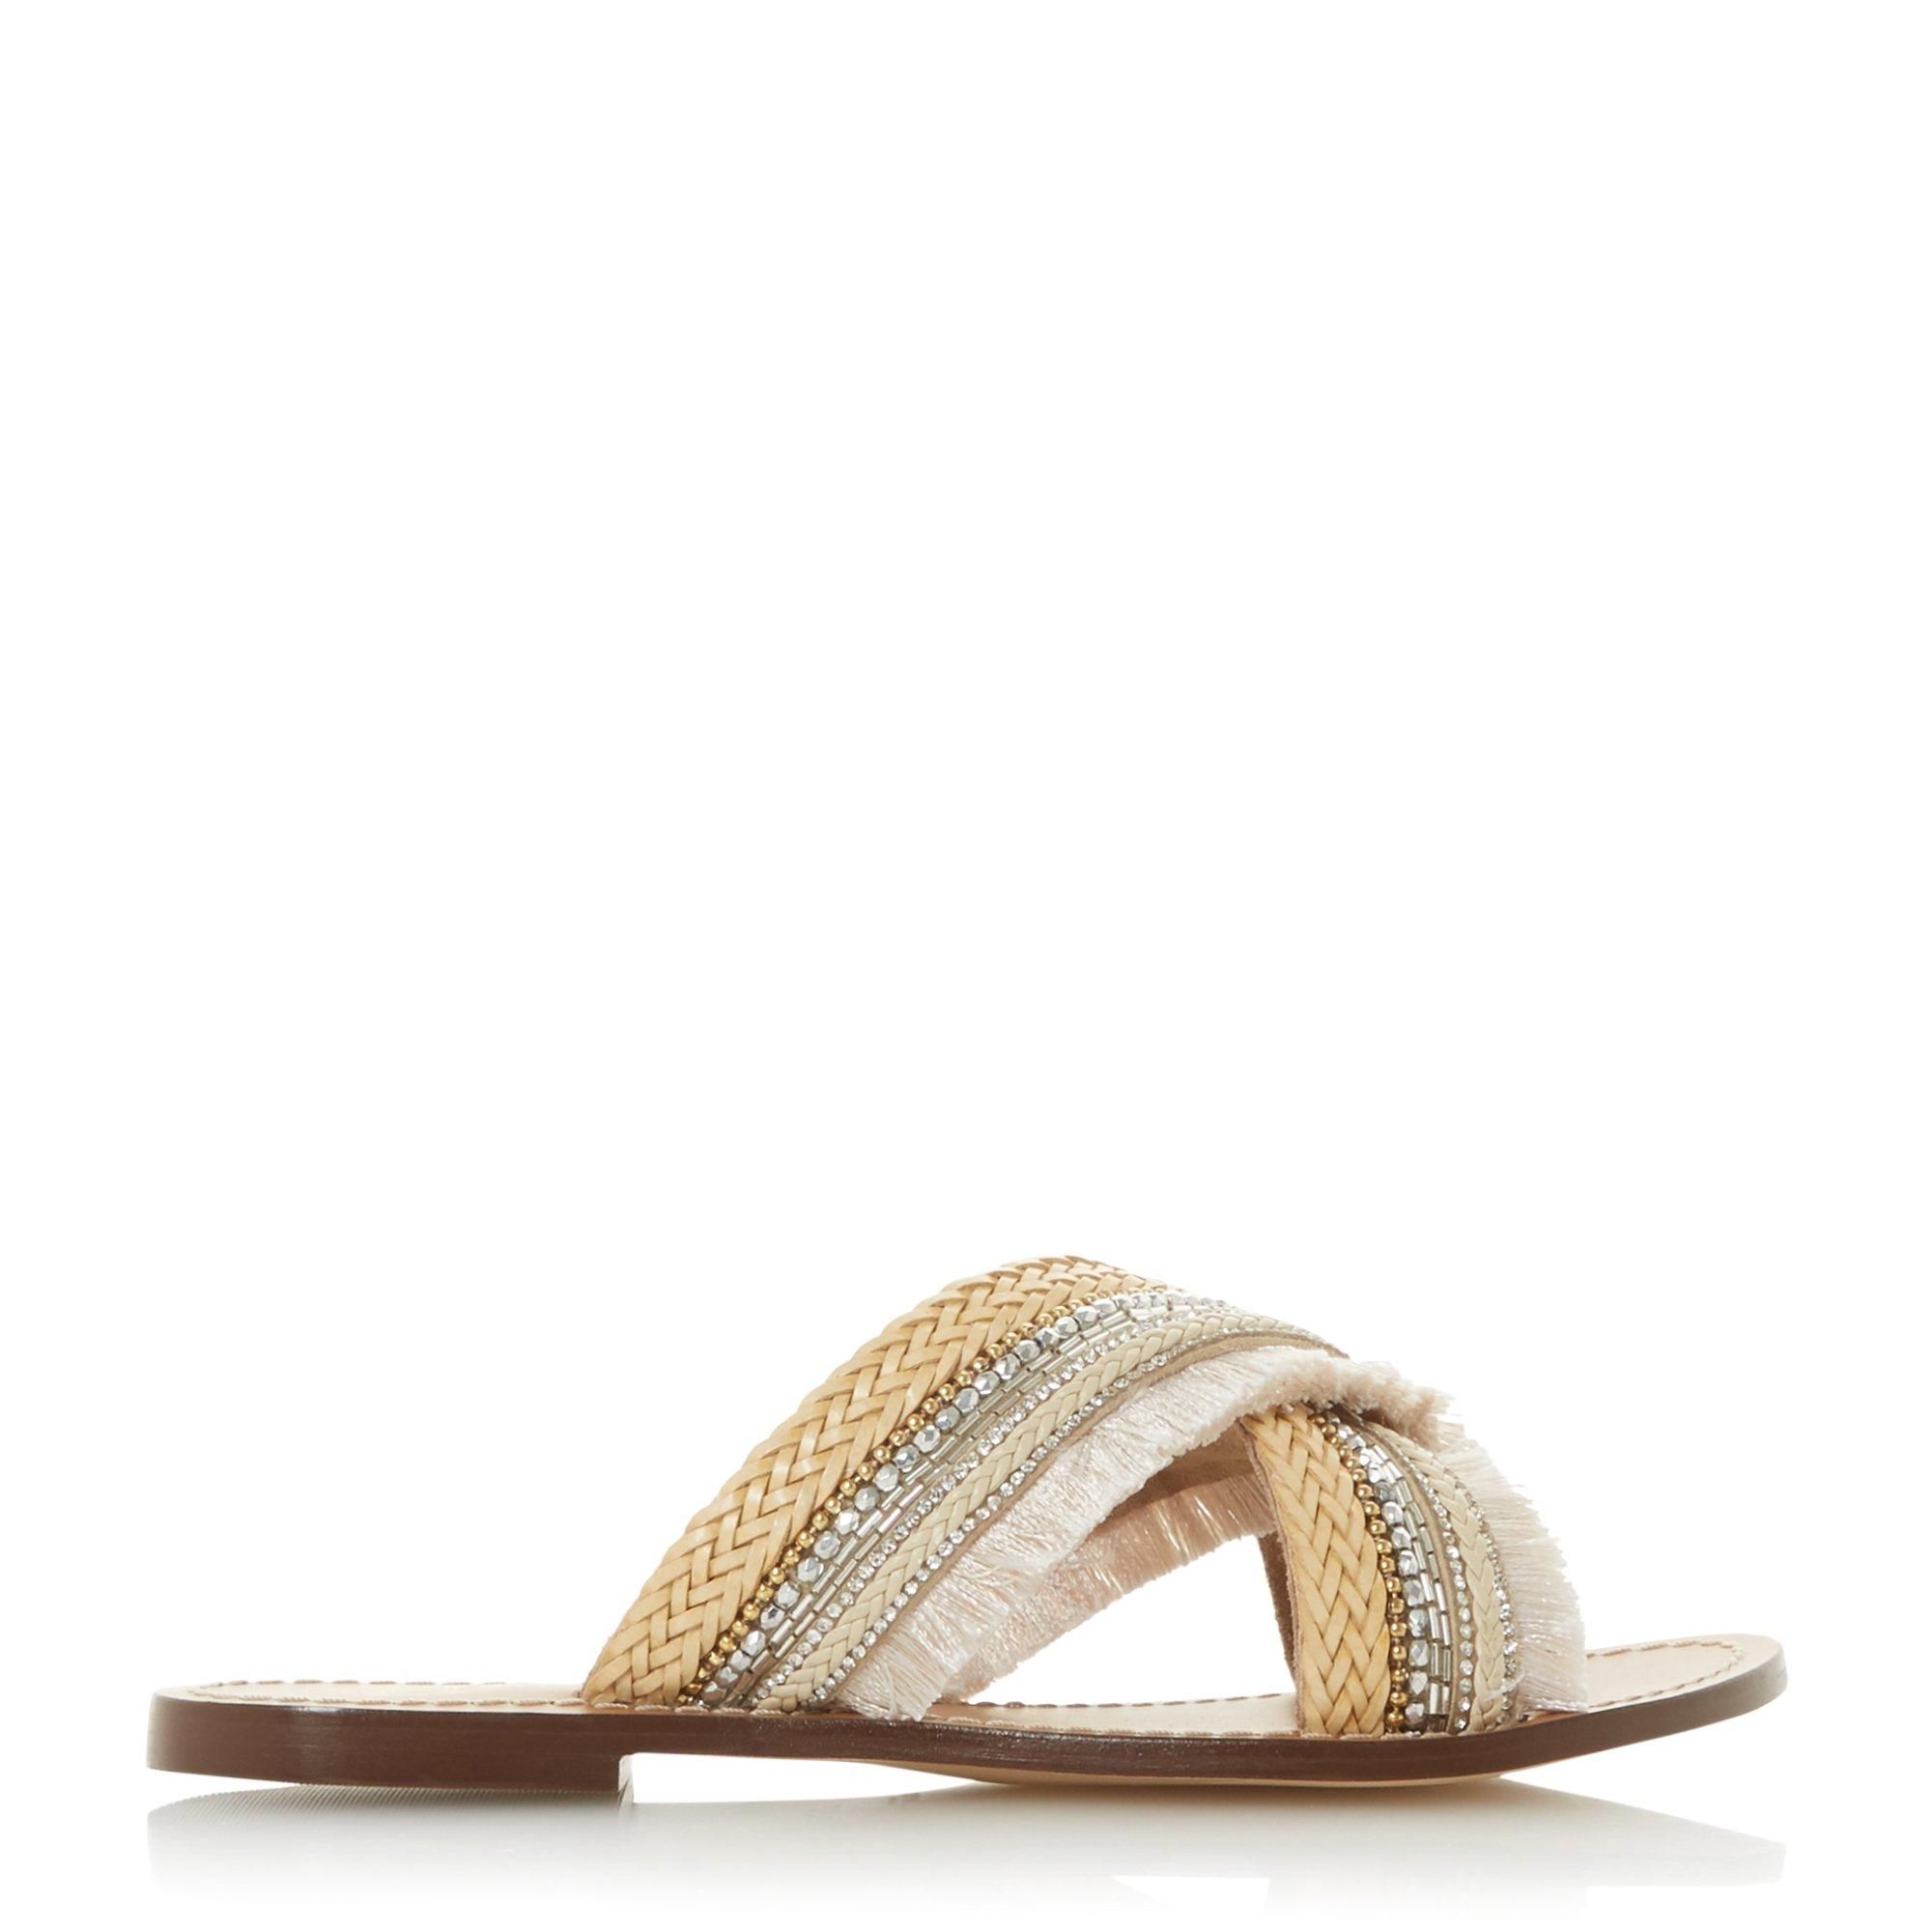 Upgrade your casual footwear with this sandal from Dune London. Showcasing an embellished fringed detail at the upper. The crossover straps and flat sole complete the design.